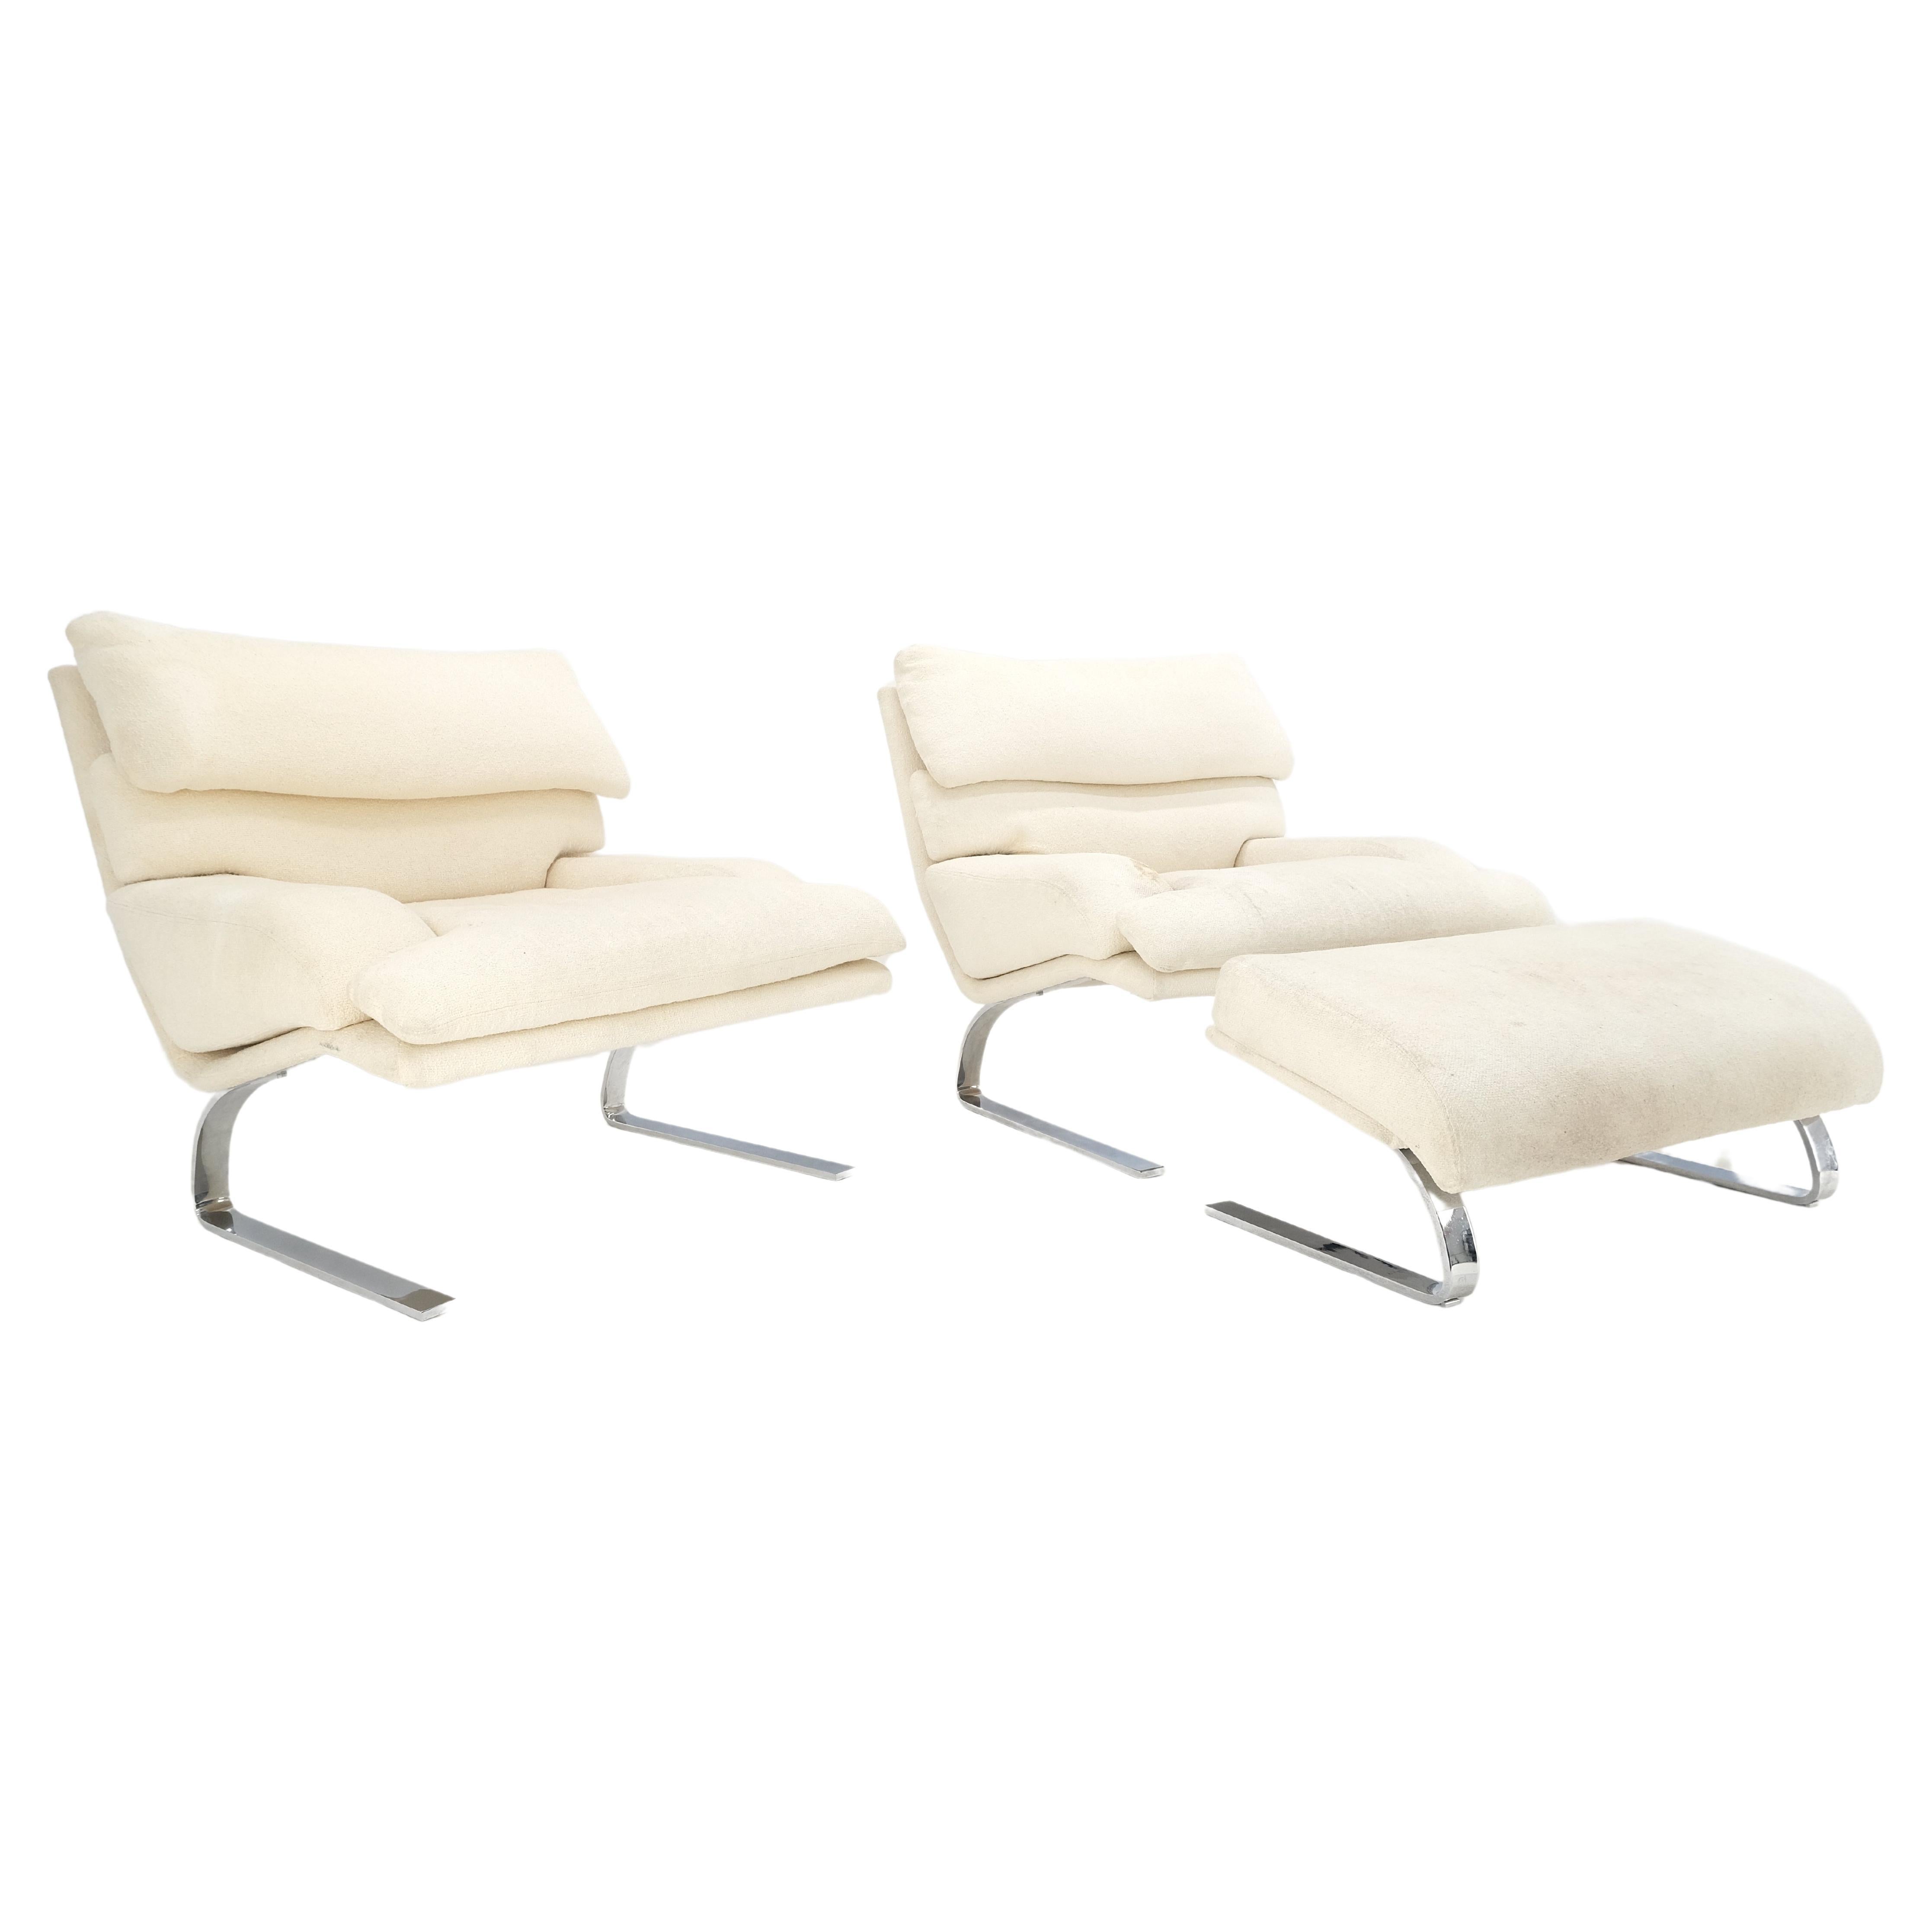 Pair Giovanni Offerdi Chrome Bases Matching Ottoman Lounge Chair AS IS upholster